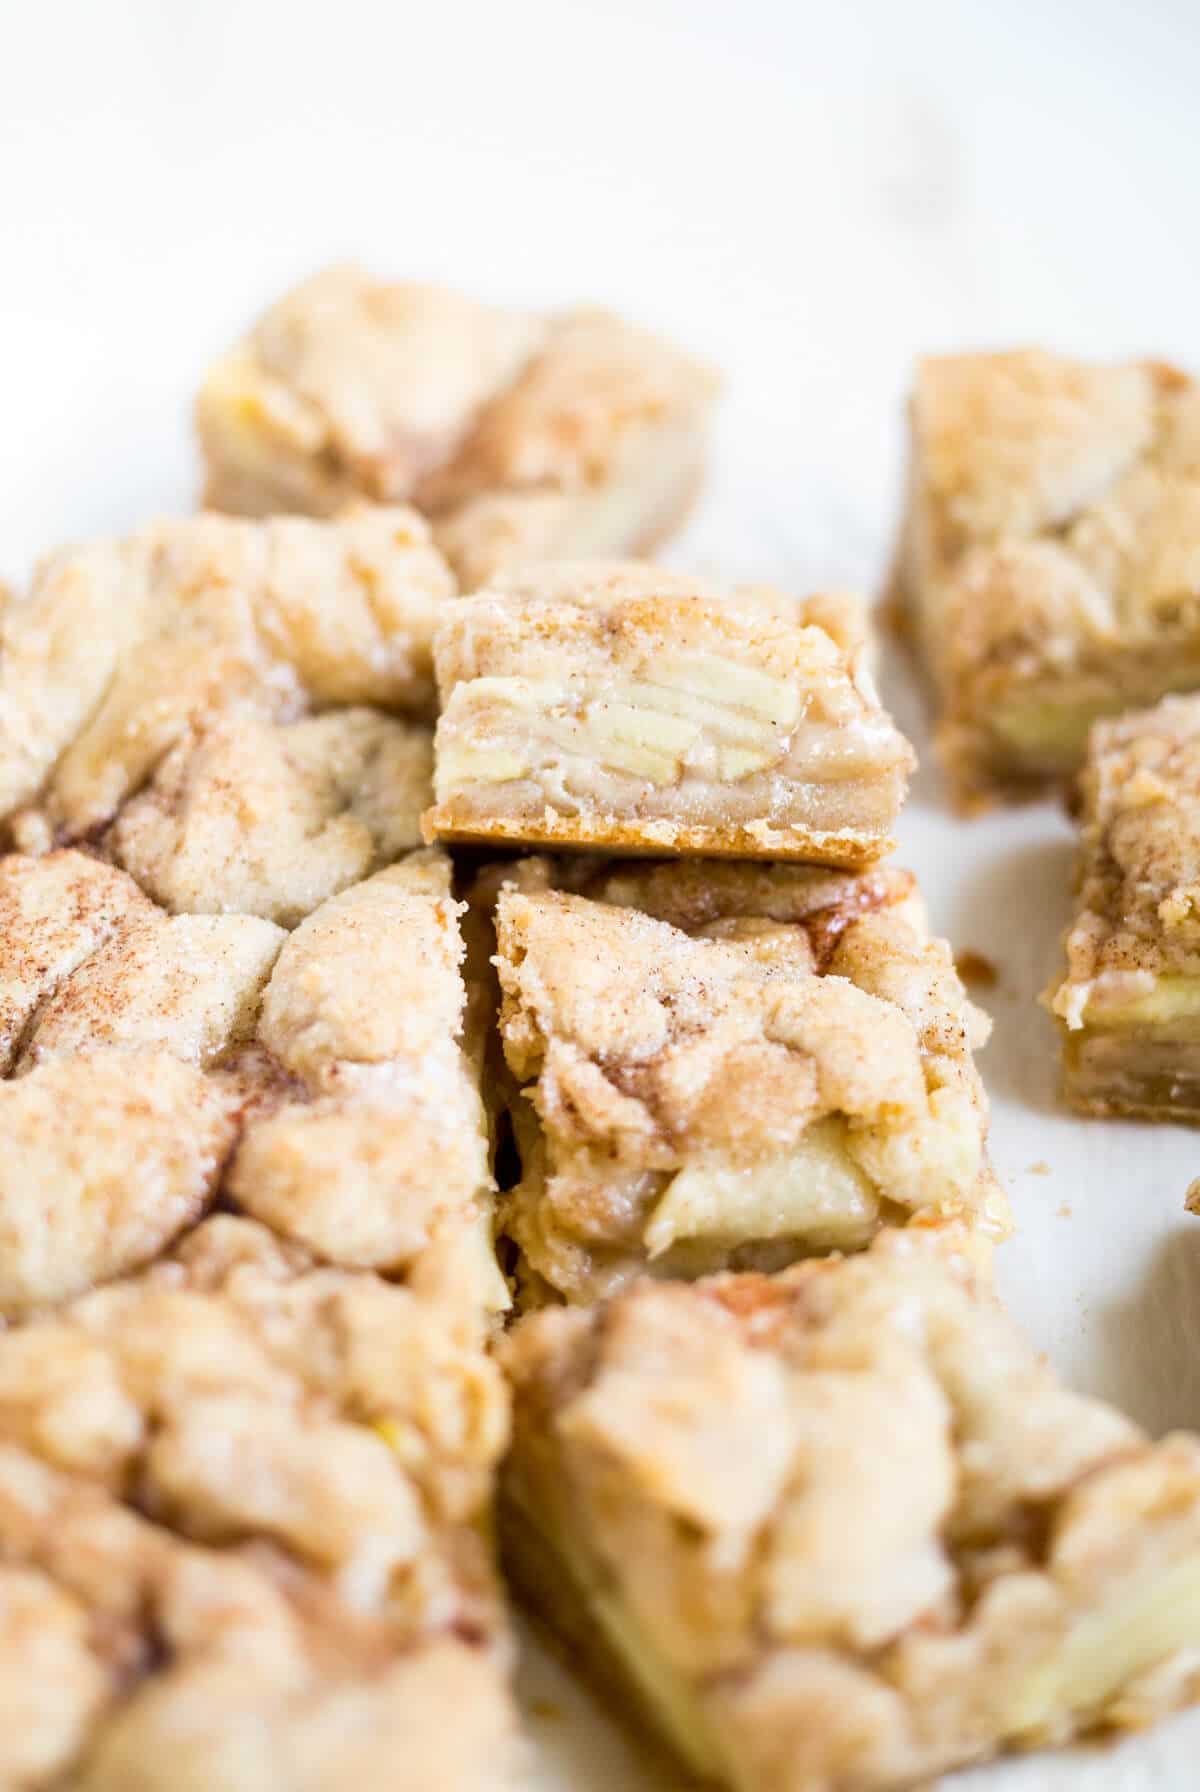 Sweet and gooey snickerdoodle apple pie bars are the perfect fall dessert. The base layer is a snickerdoodle bar topped with cinnamon-spice apple pie filling and topped with more snickerdoodle. It's delicious served warm with ice cream!